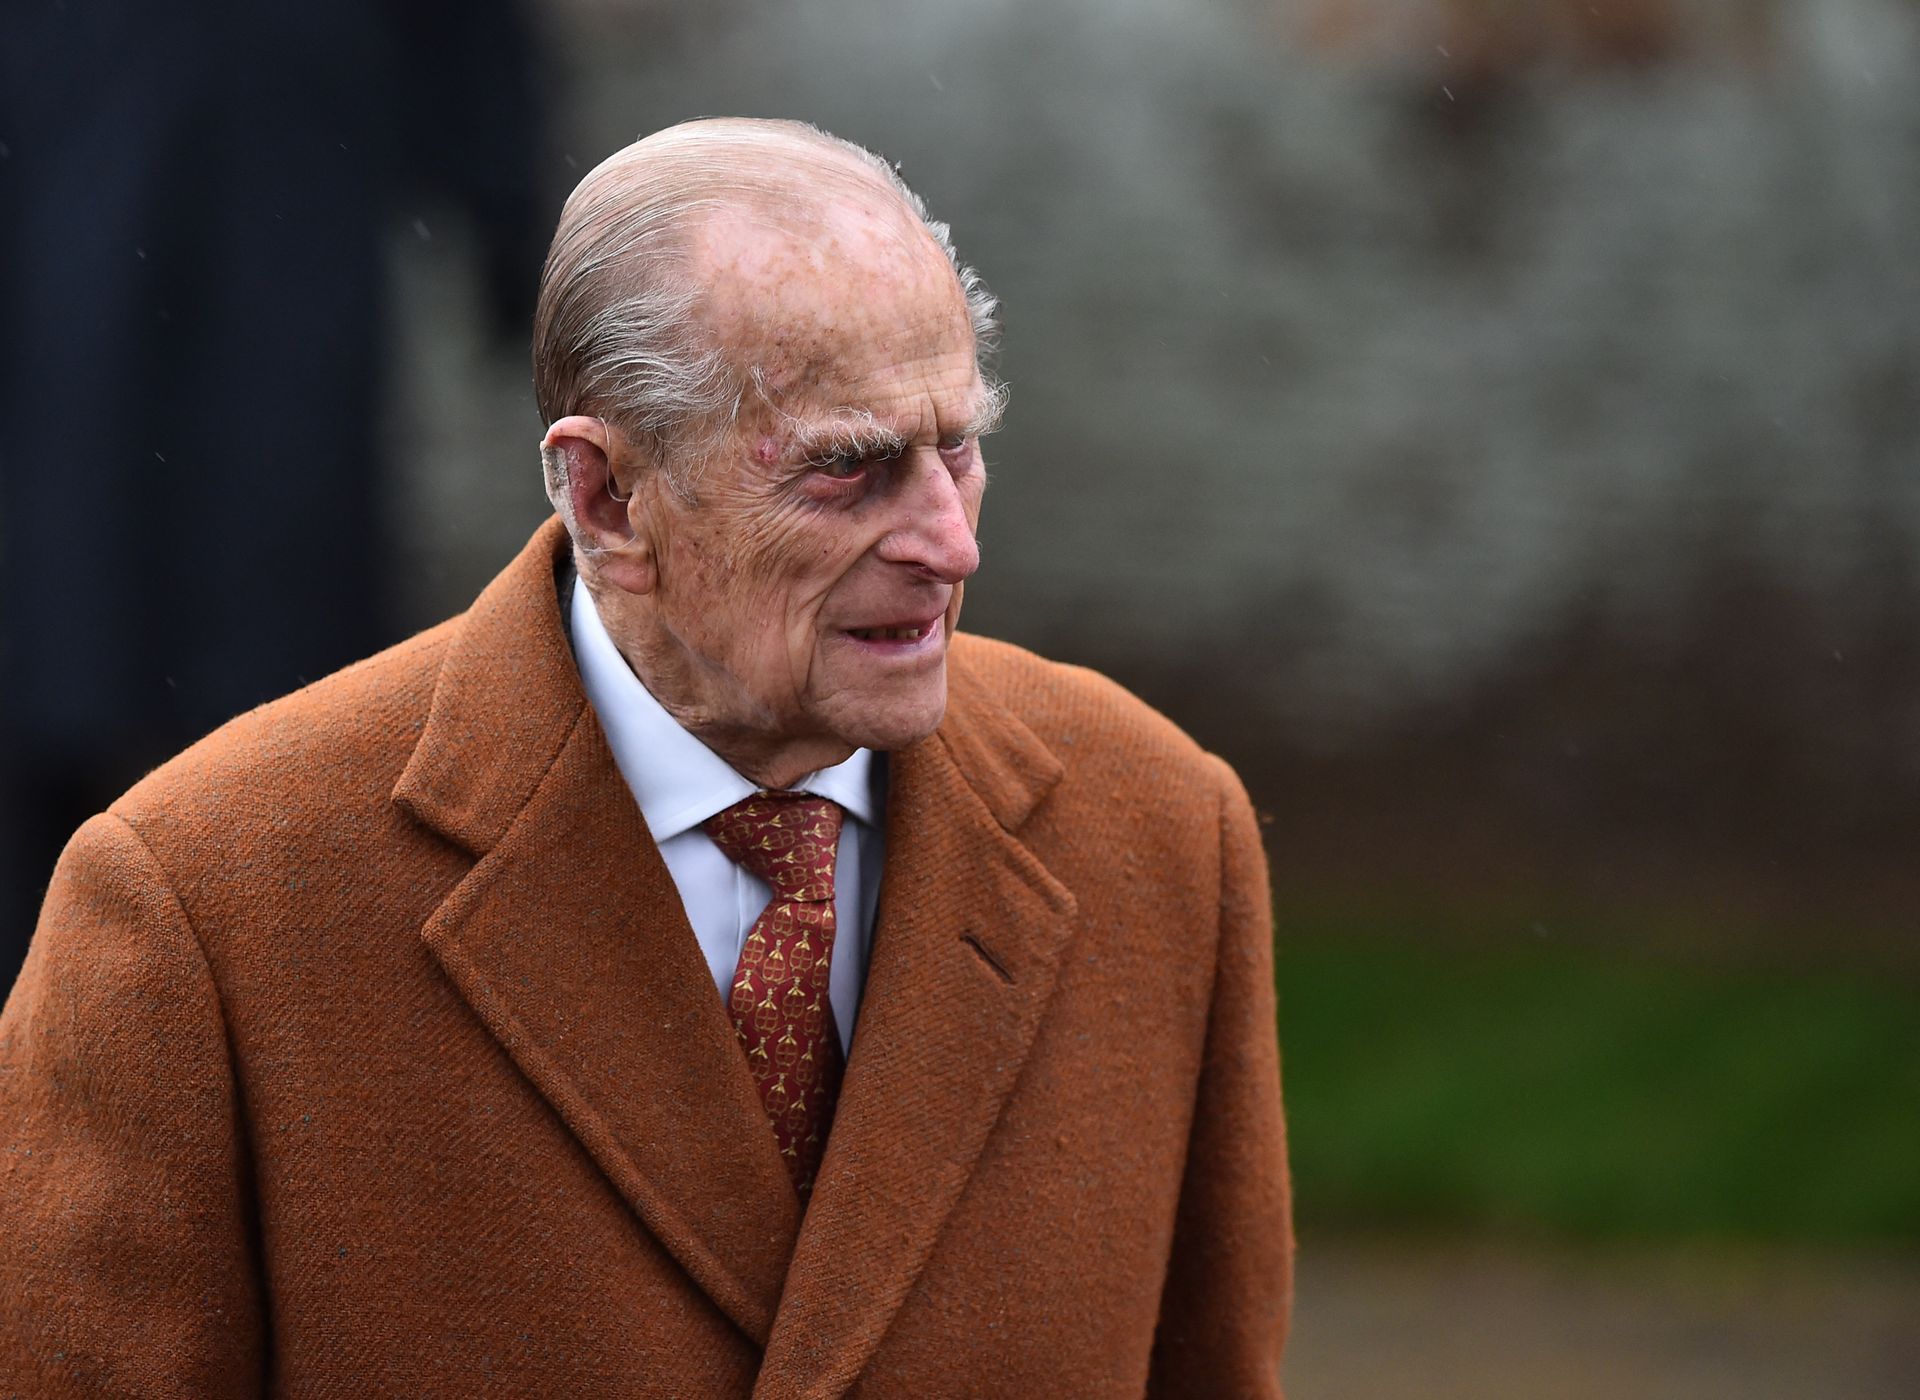 Prince Philip in 2015.